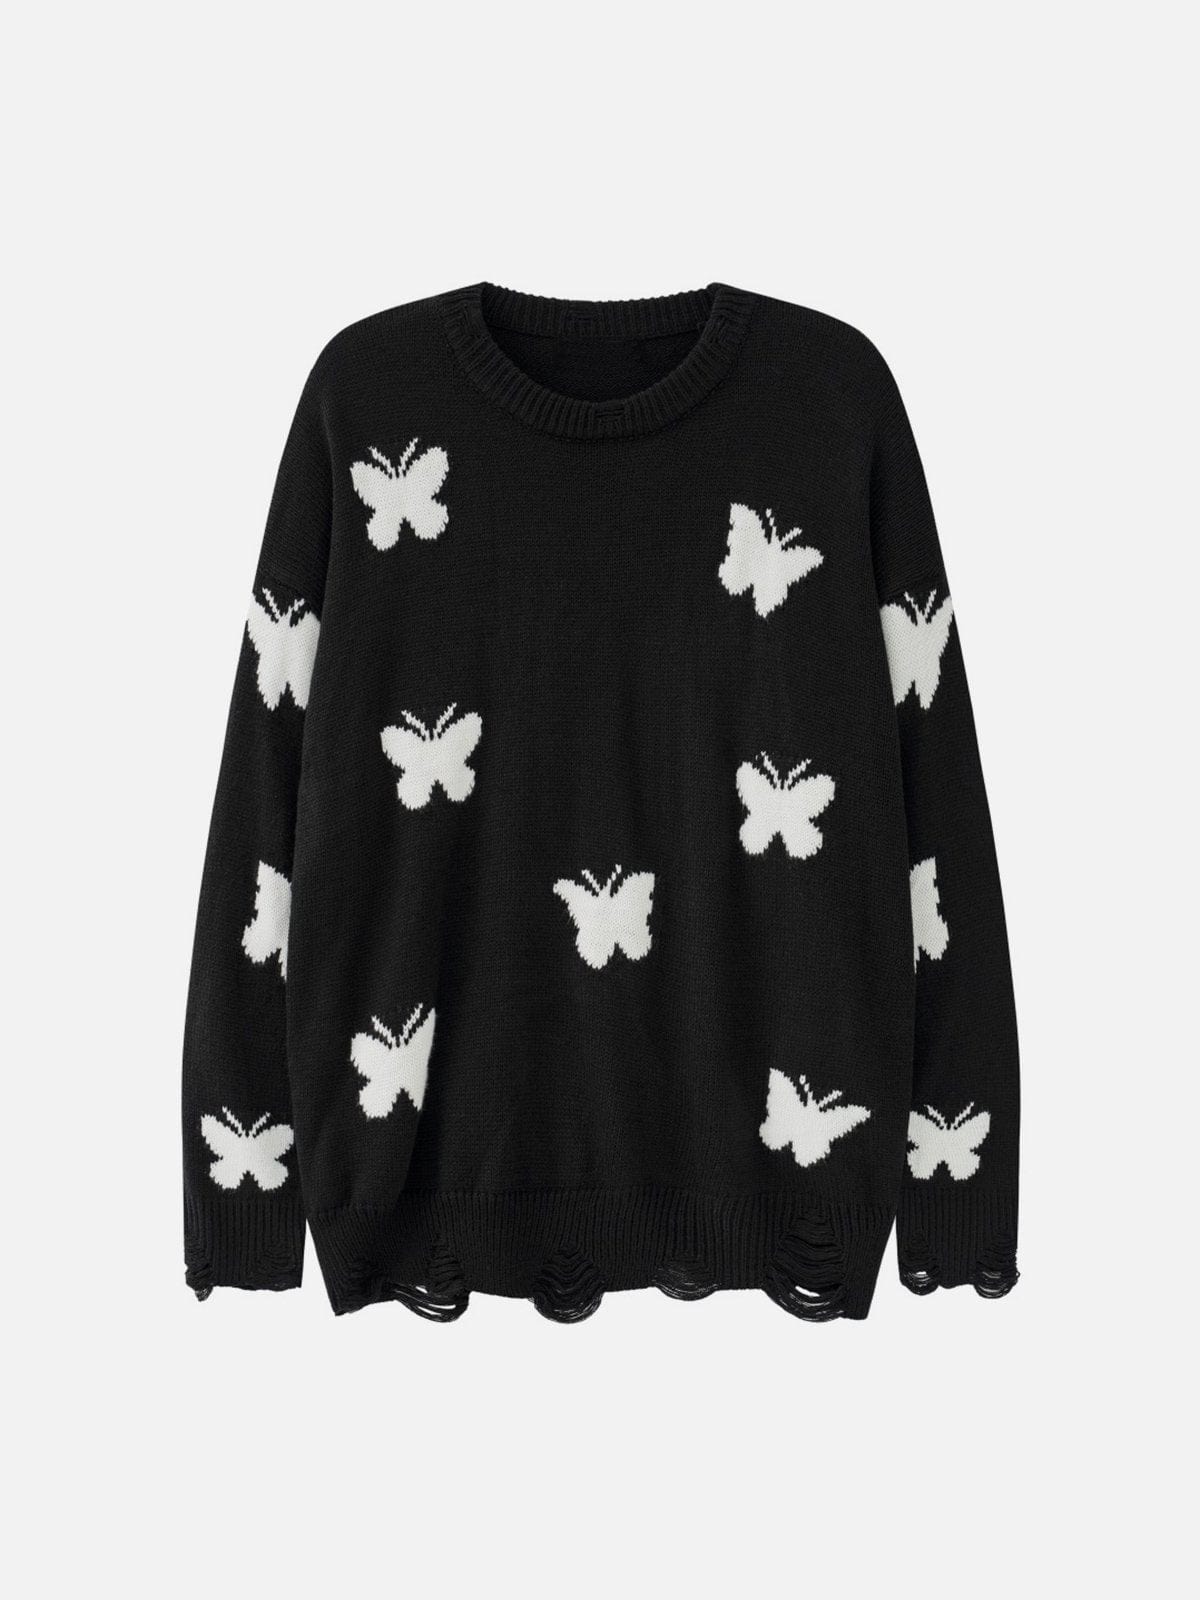 Full Print Butterfly Sweater